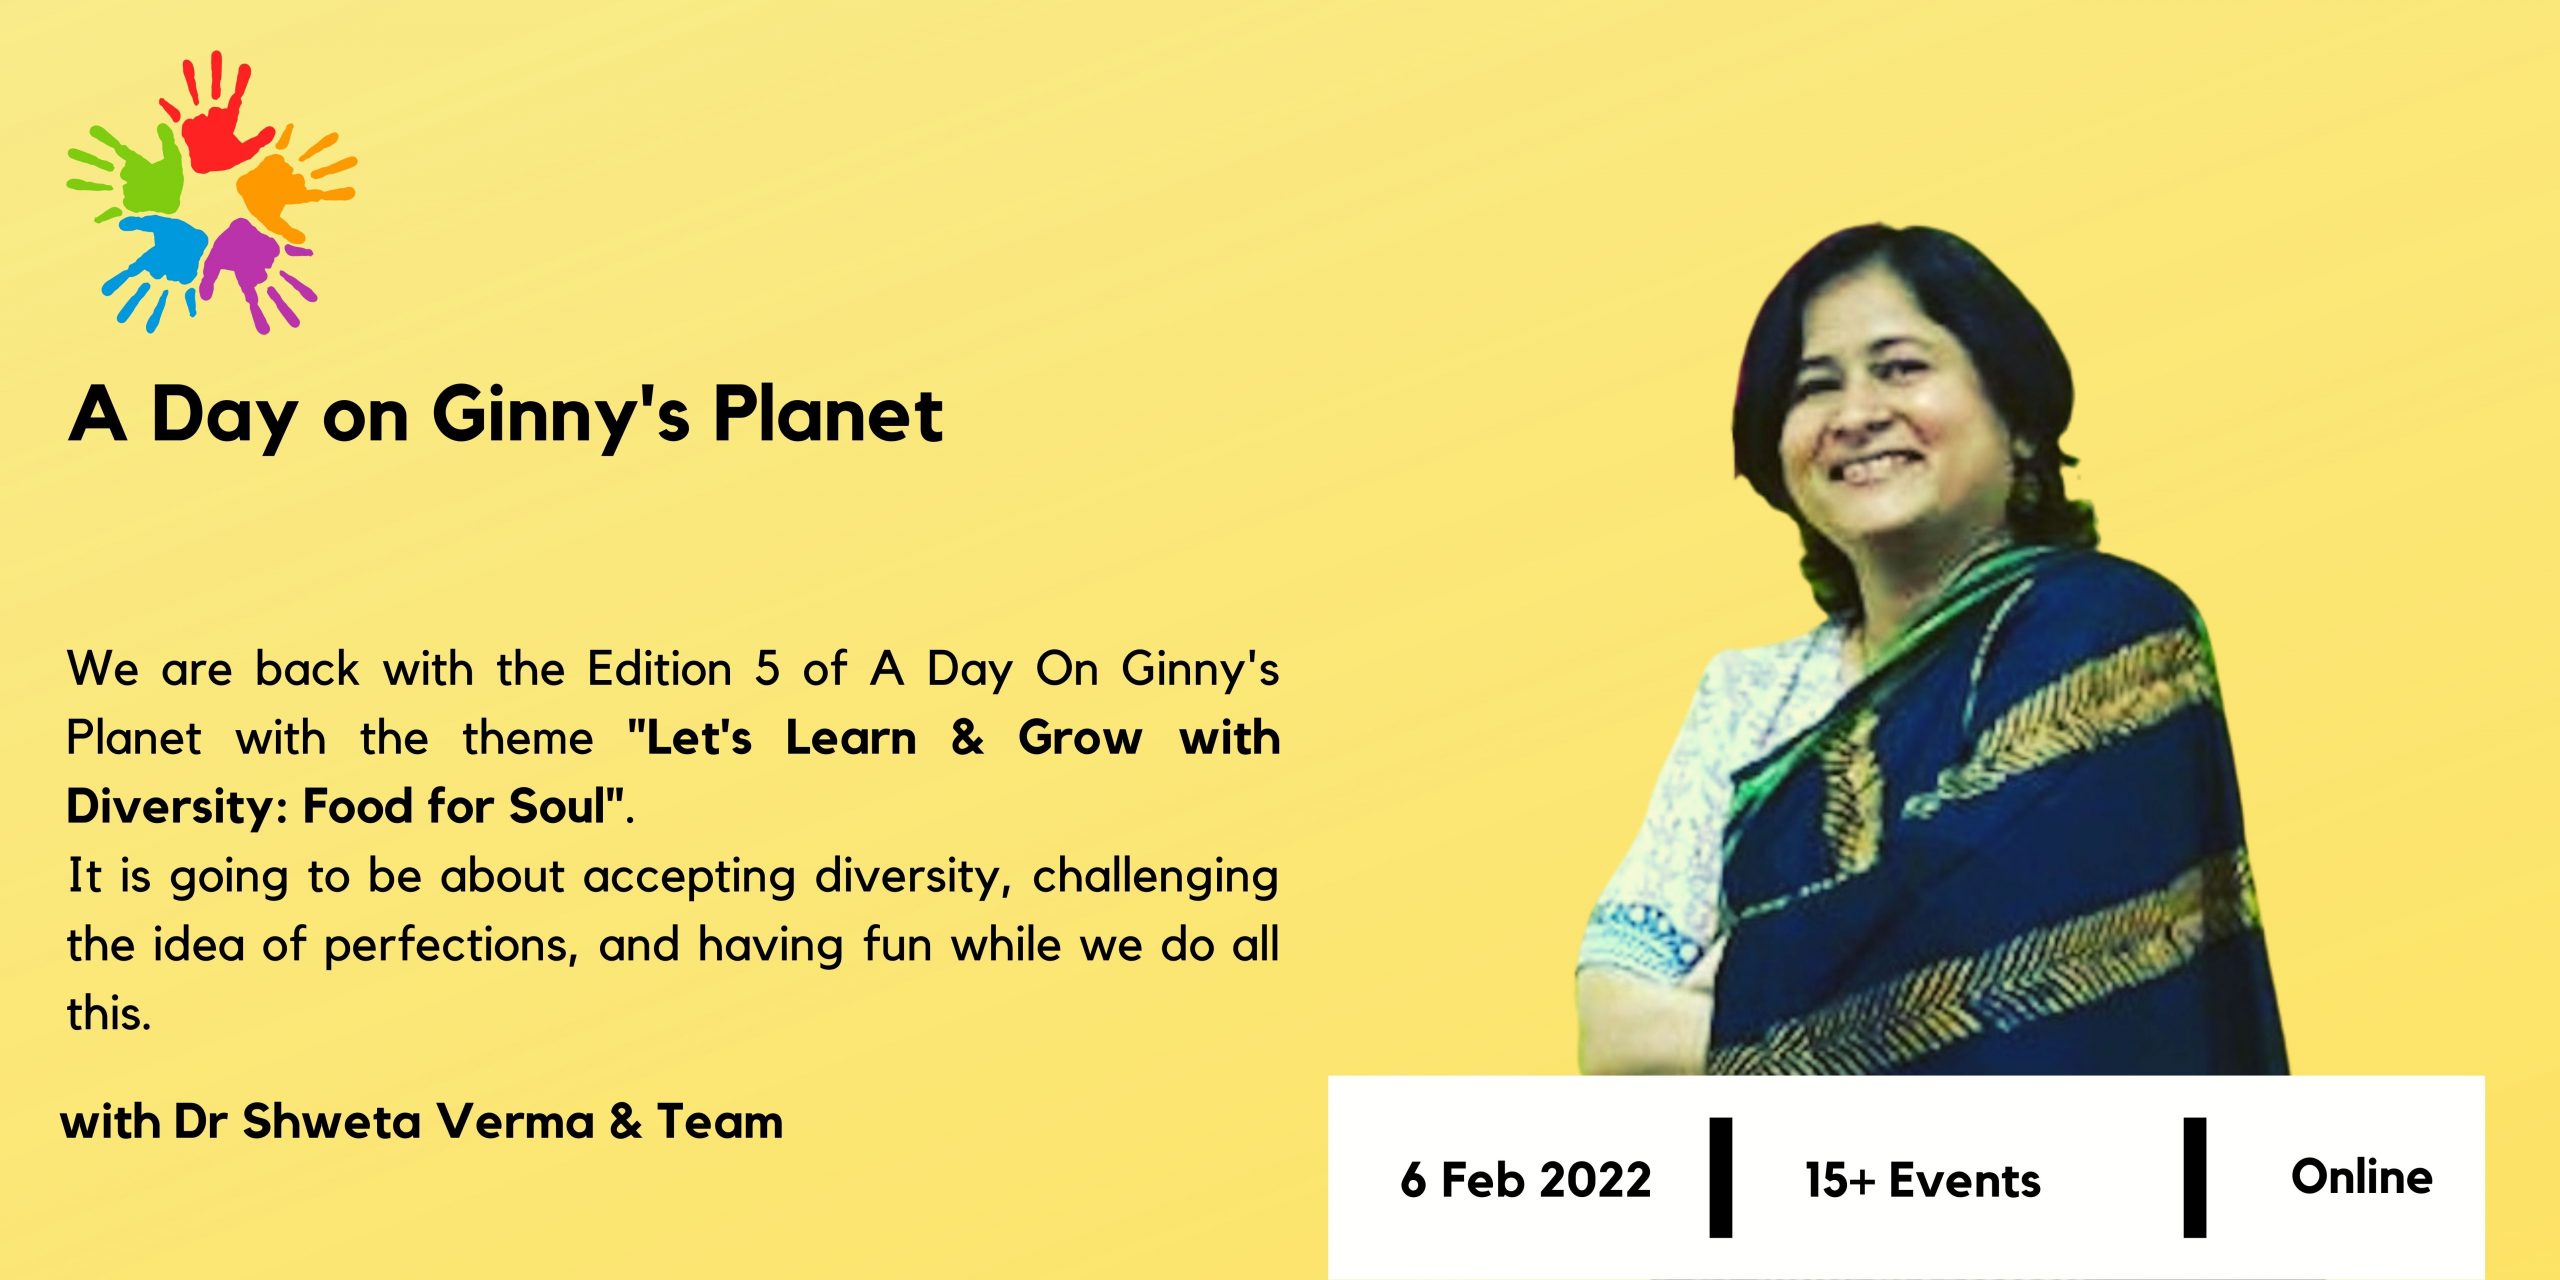 We are back with the Edition 5 of A Day On Ginny's Planet with the theme "Let's Learn & Grow with Diversity: Food for Soul". It is going to be about accepting diversity, challenging the idea of perfections, and having fun while we do all this.